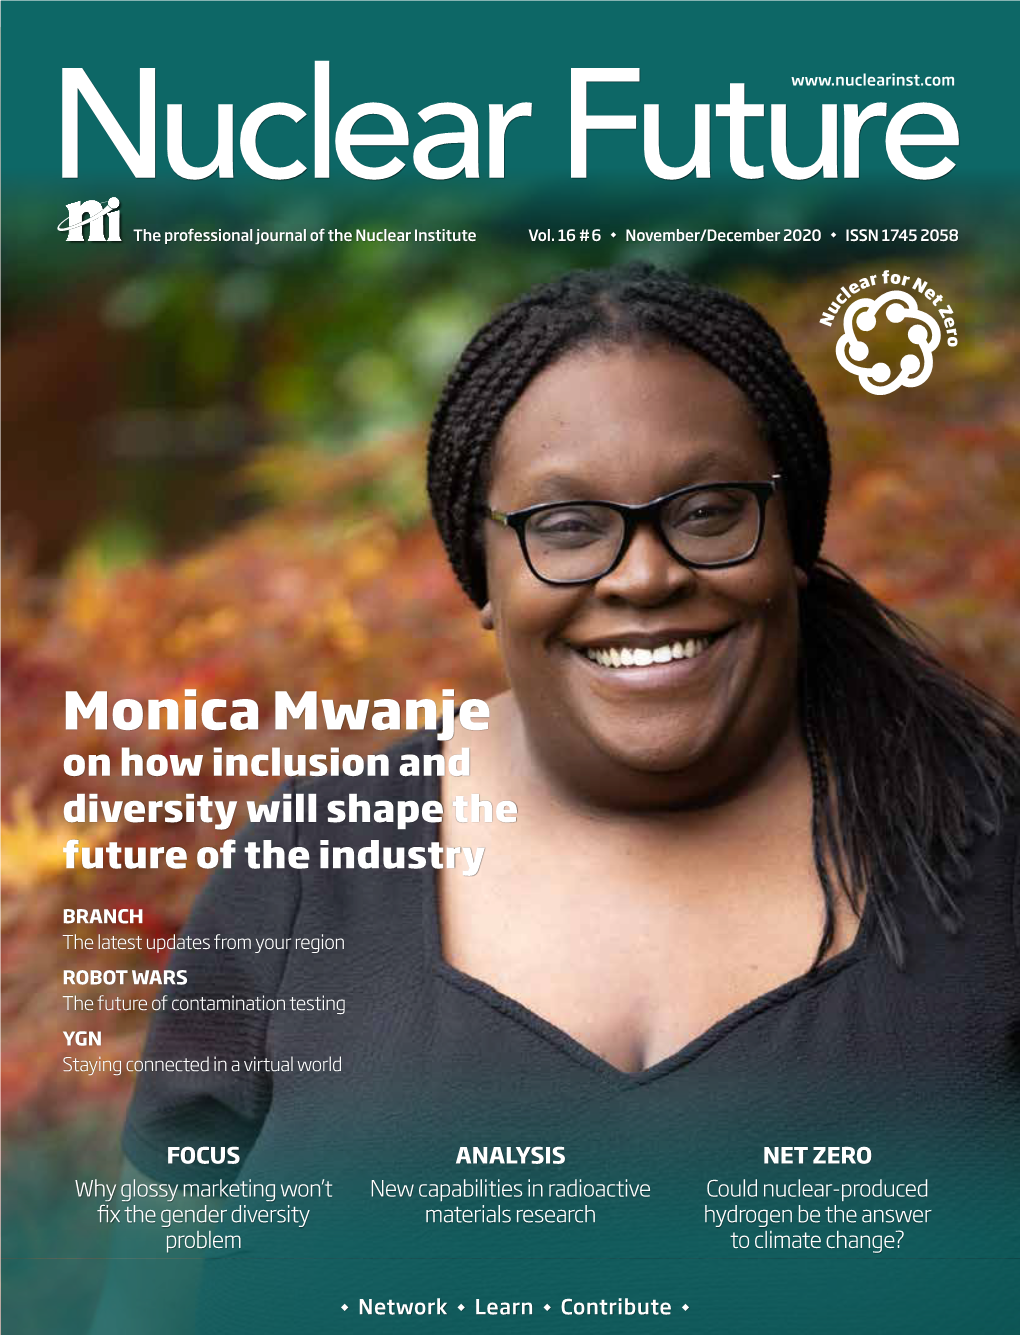 Monica Mwanje on How Inclusion and Diversity Will Shape the Future of the Industry